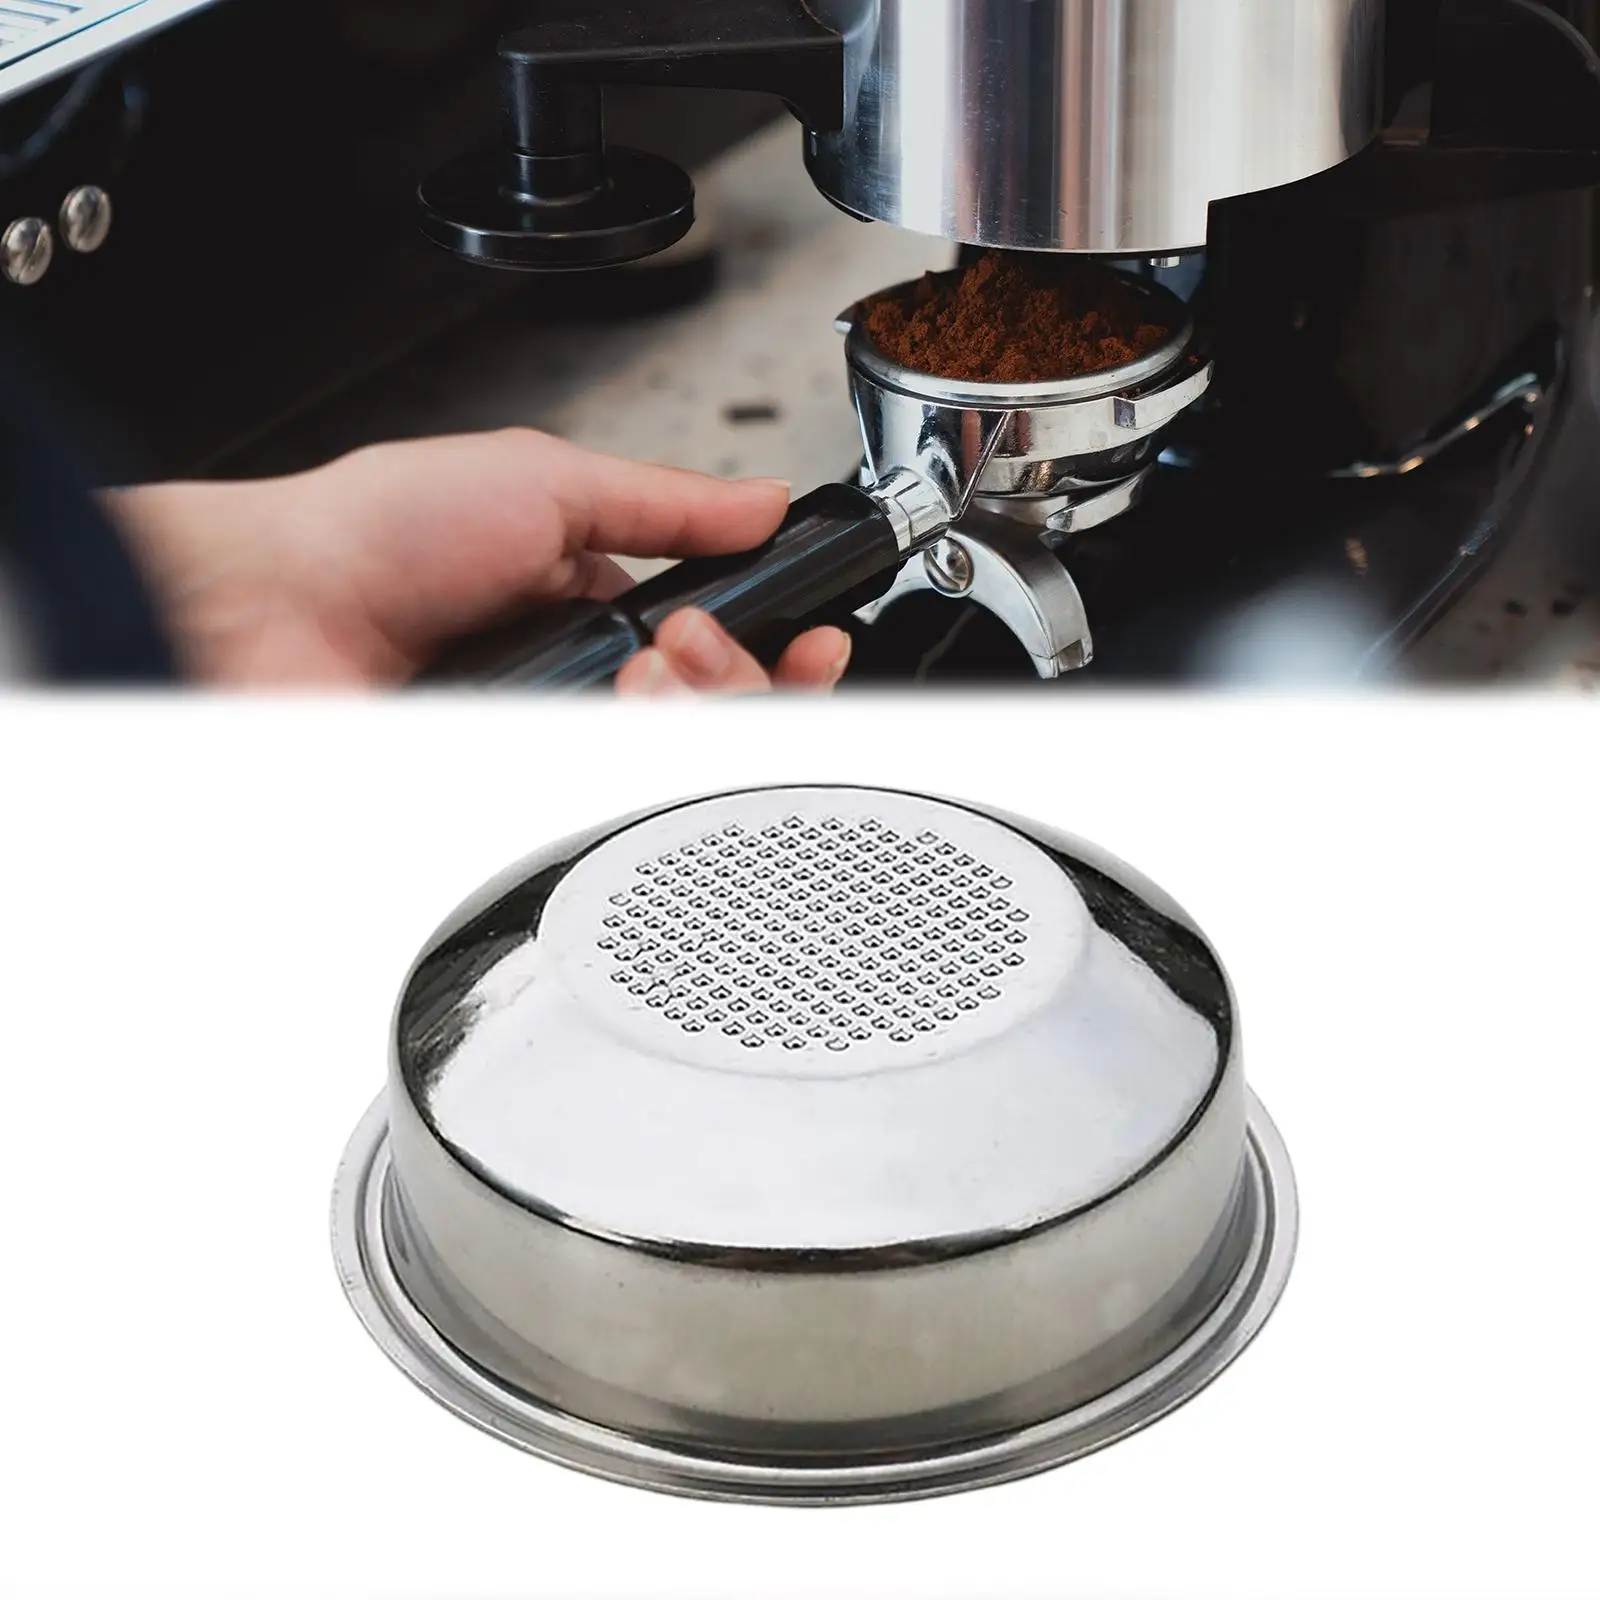 Stainless Steel 51mm Coffee Filter Basket Powder Bowl Replacement Pressurized Coffee Machine Filter